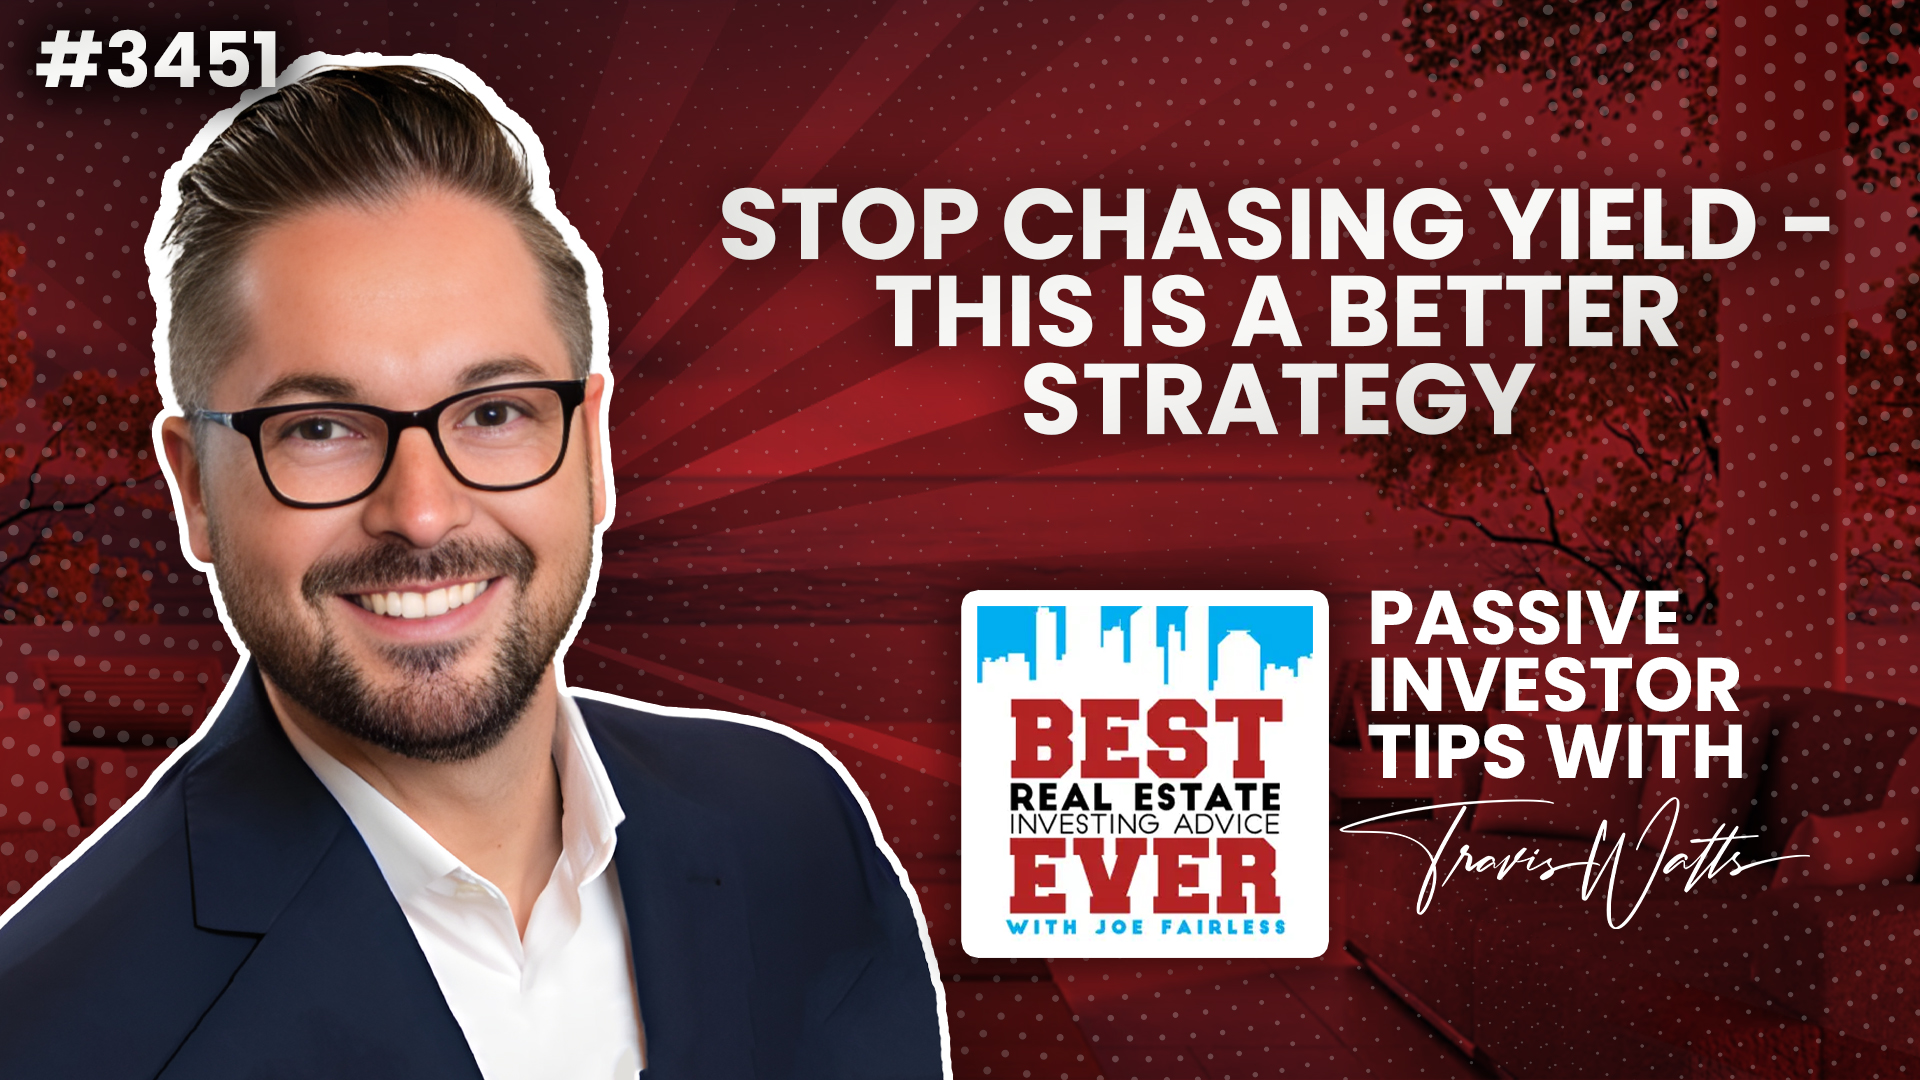 JF3451: Stop Chasing Yield - This is a Better Strategy | Passive Investor Tips ft. Travis Watts